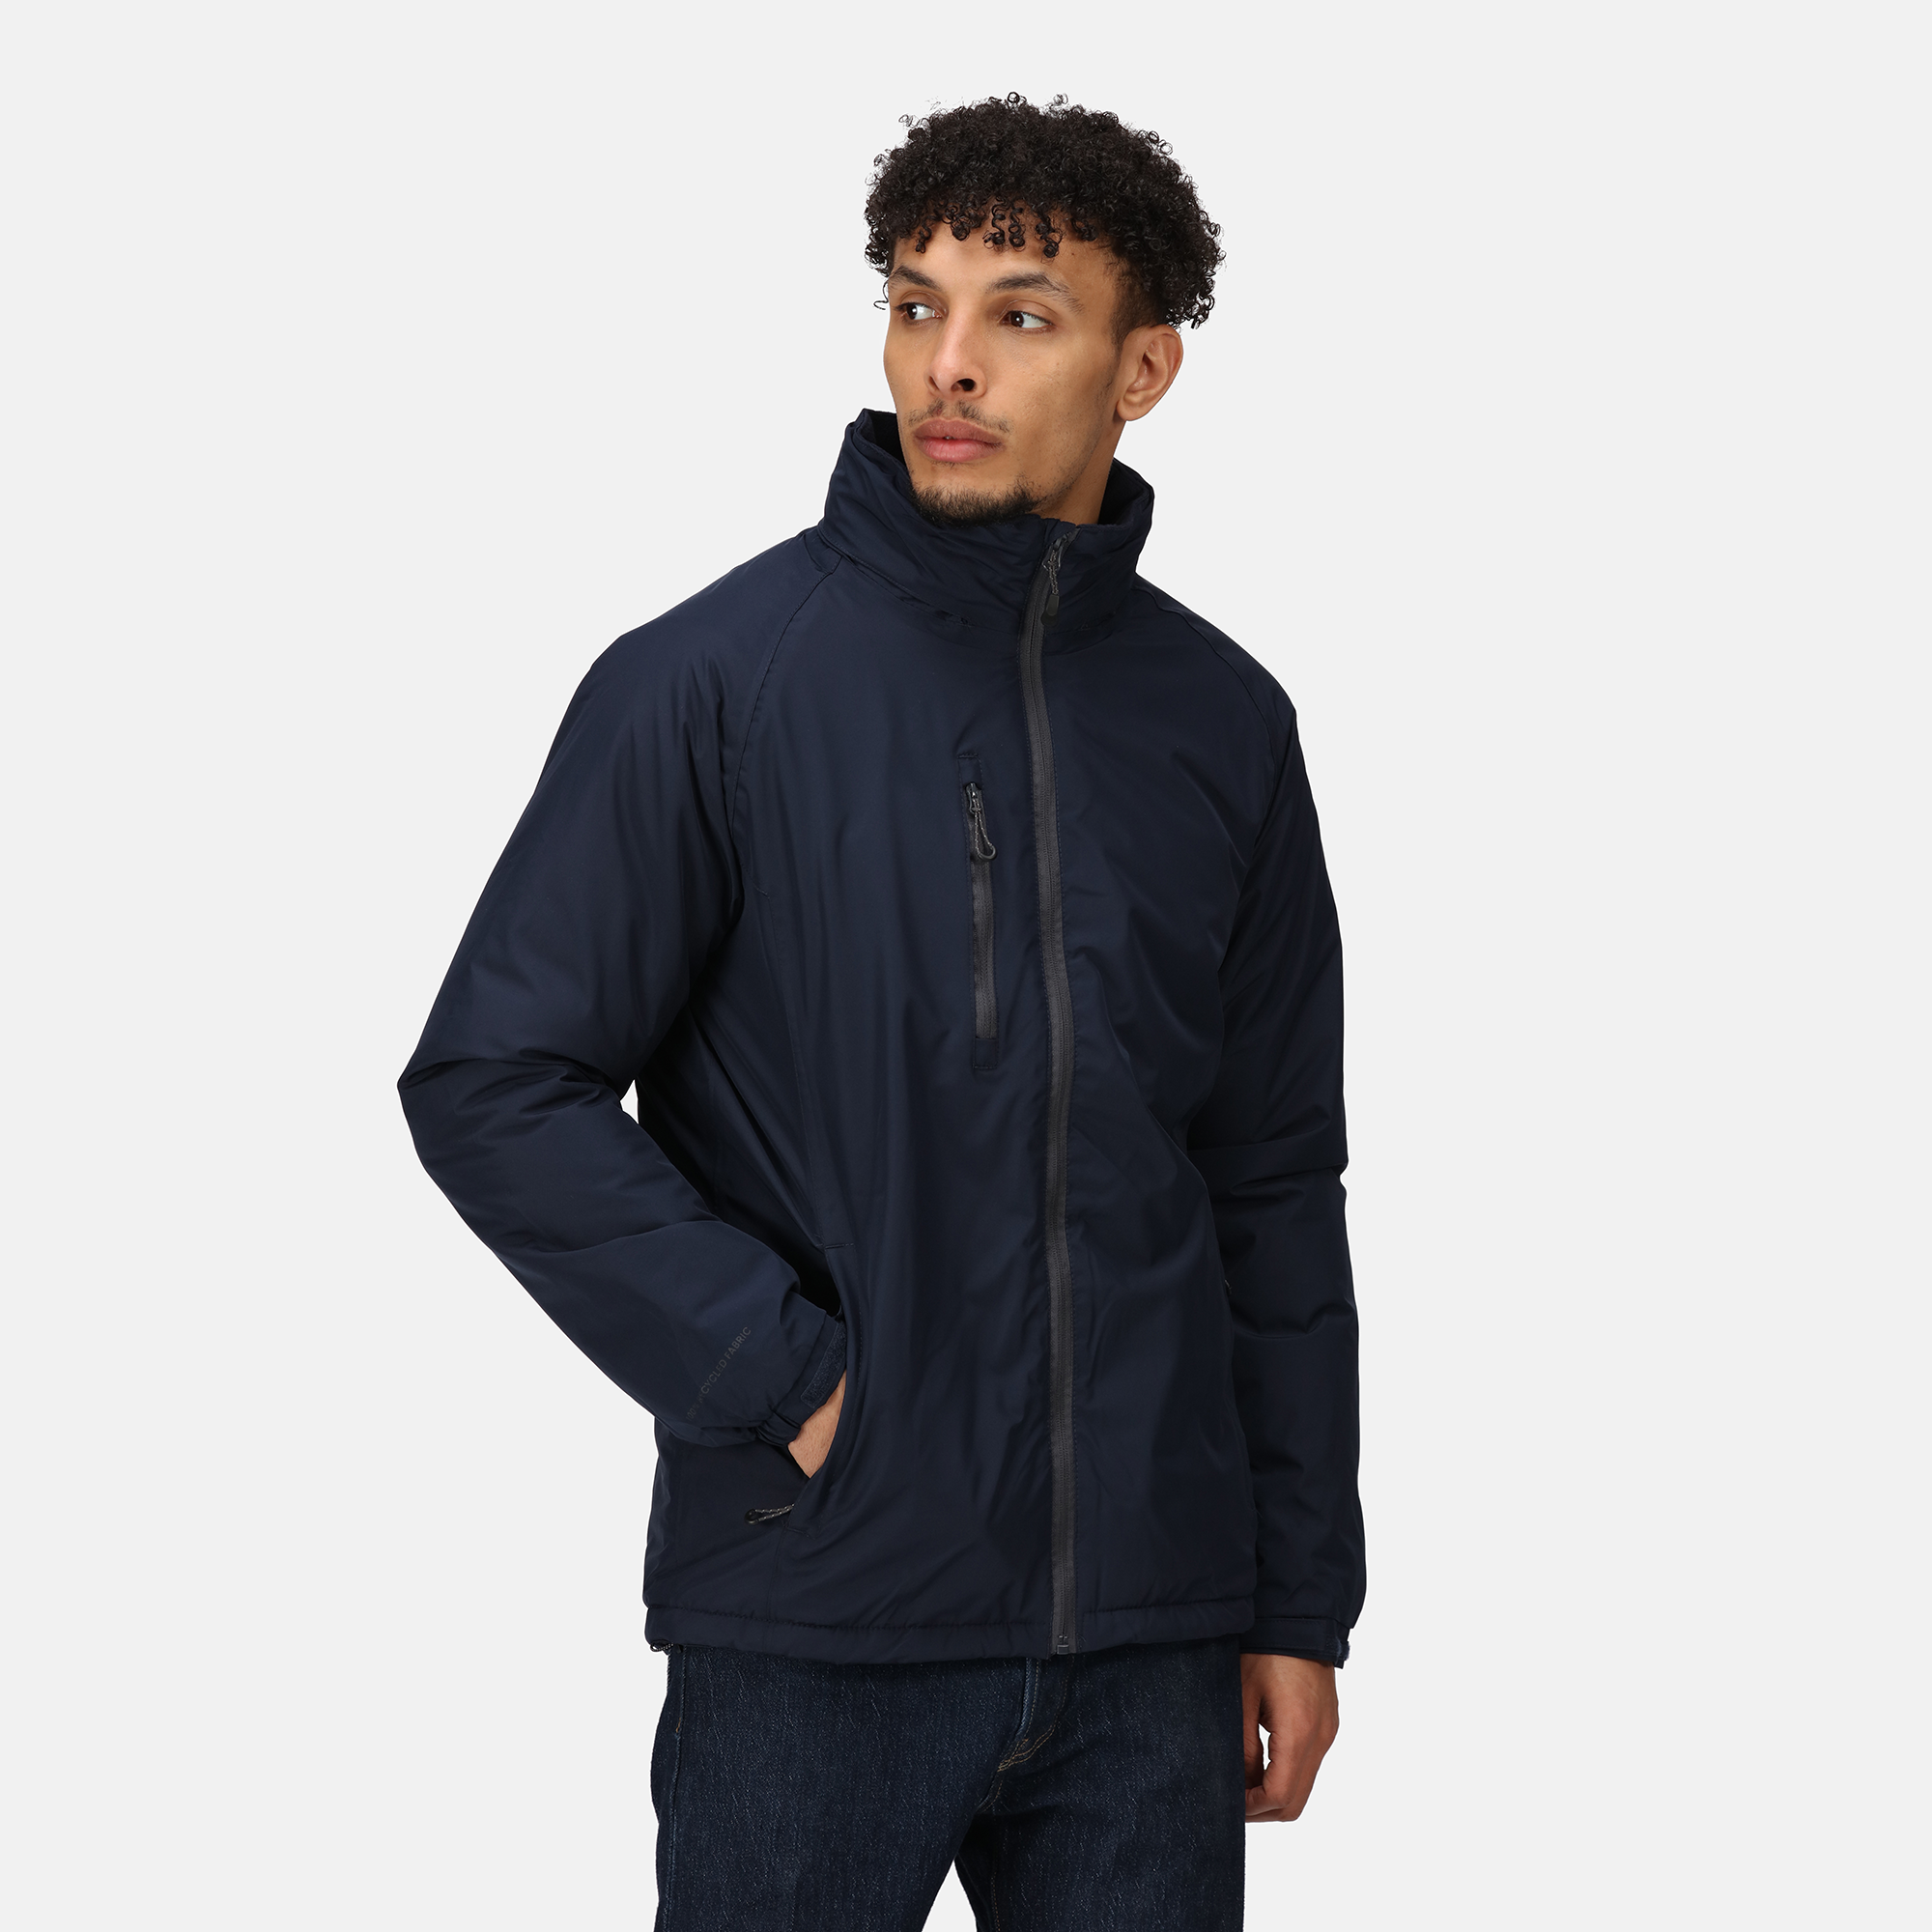 HONESTLY MADE RECYCLED INSULATED JACKET - Regatta Professional